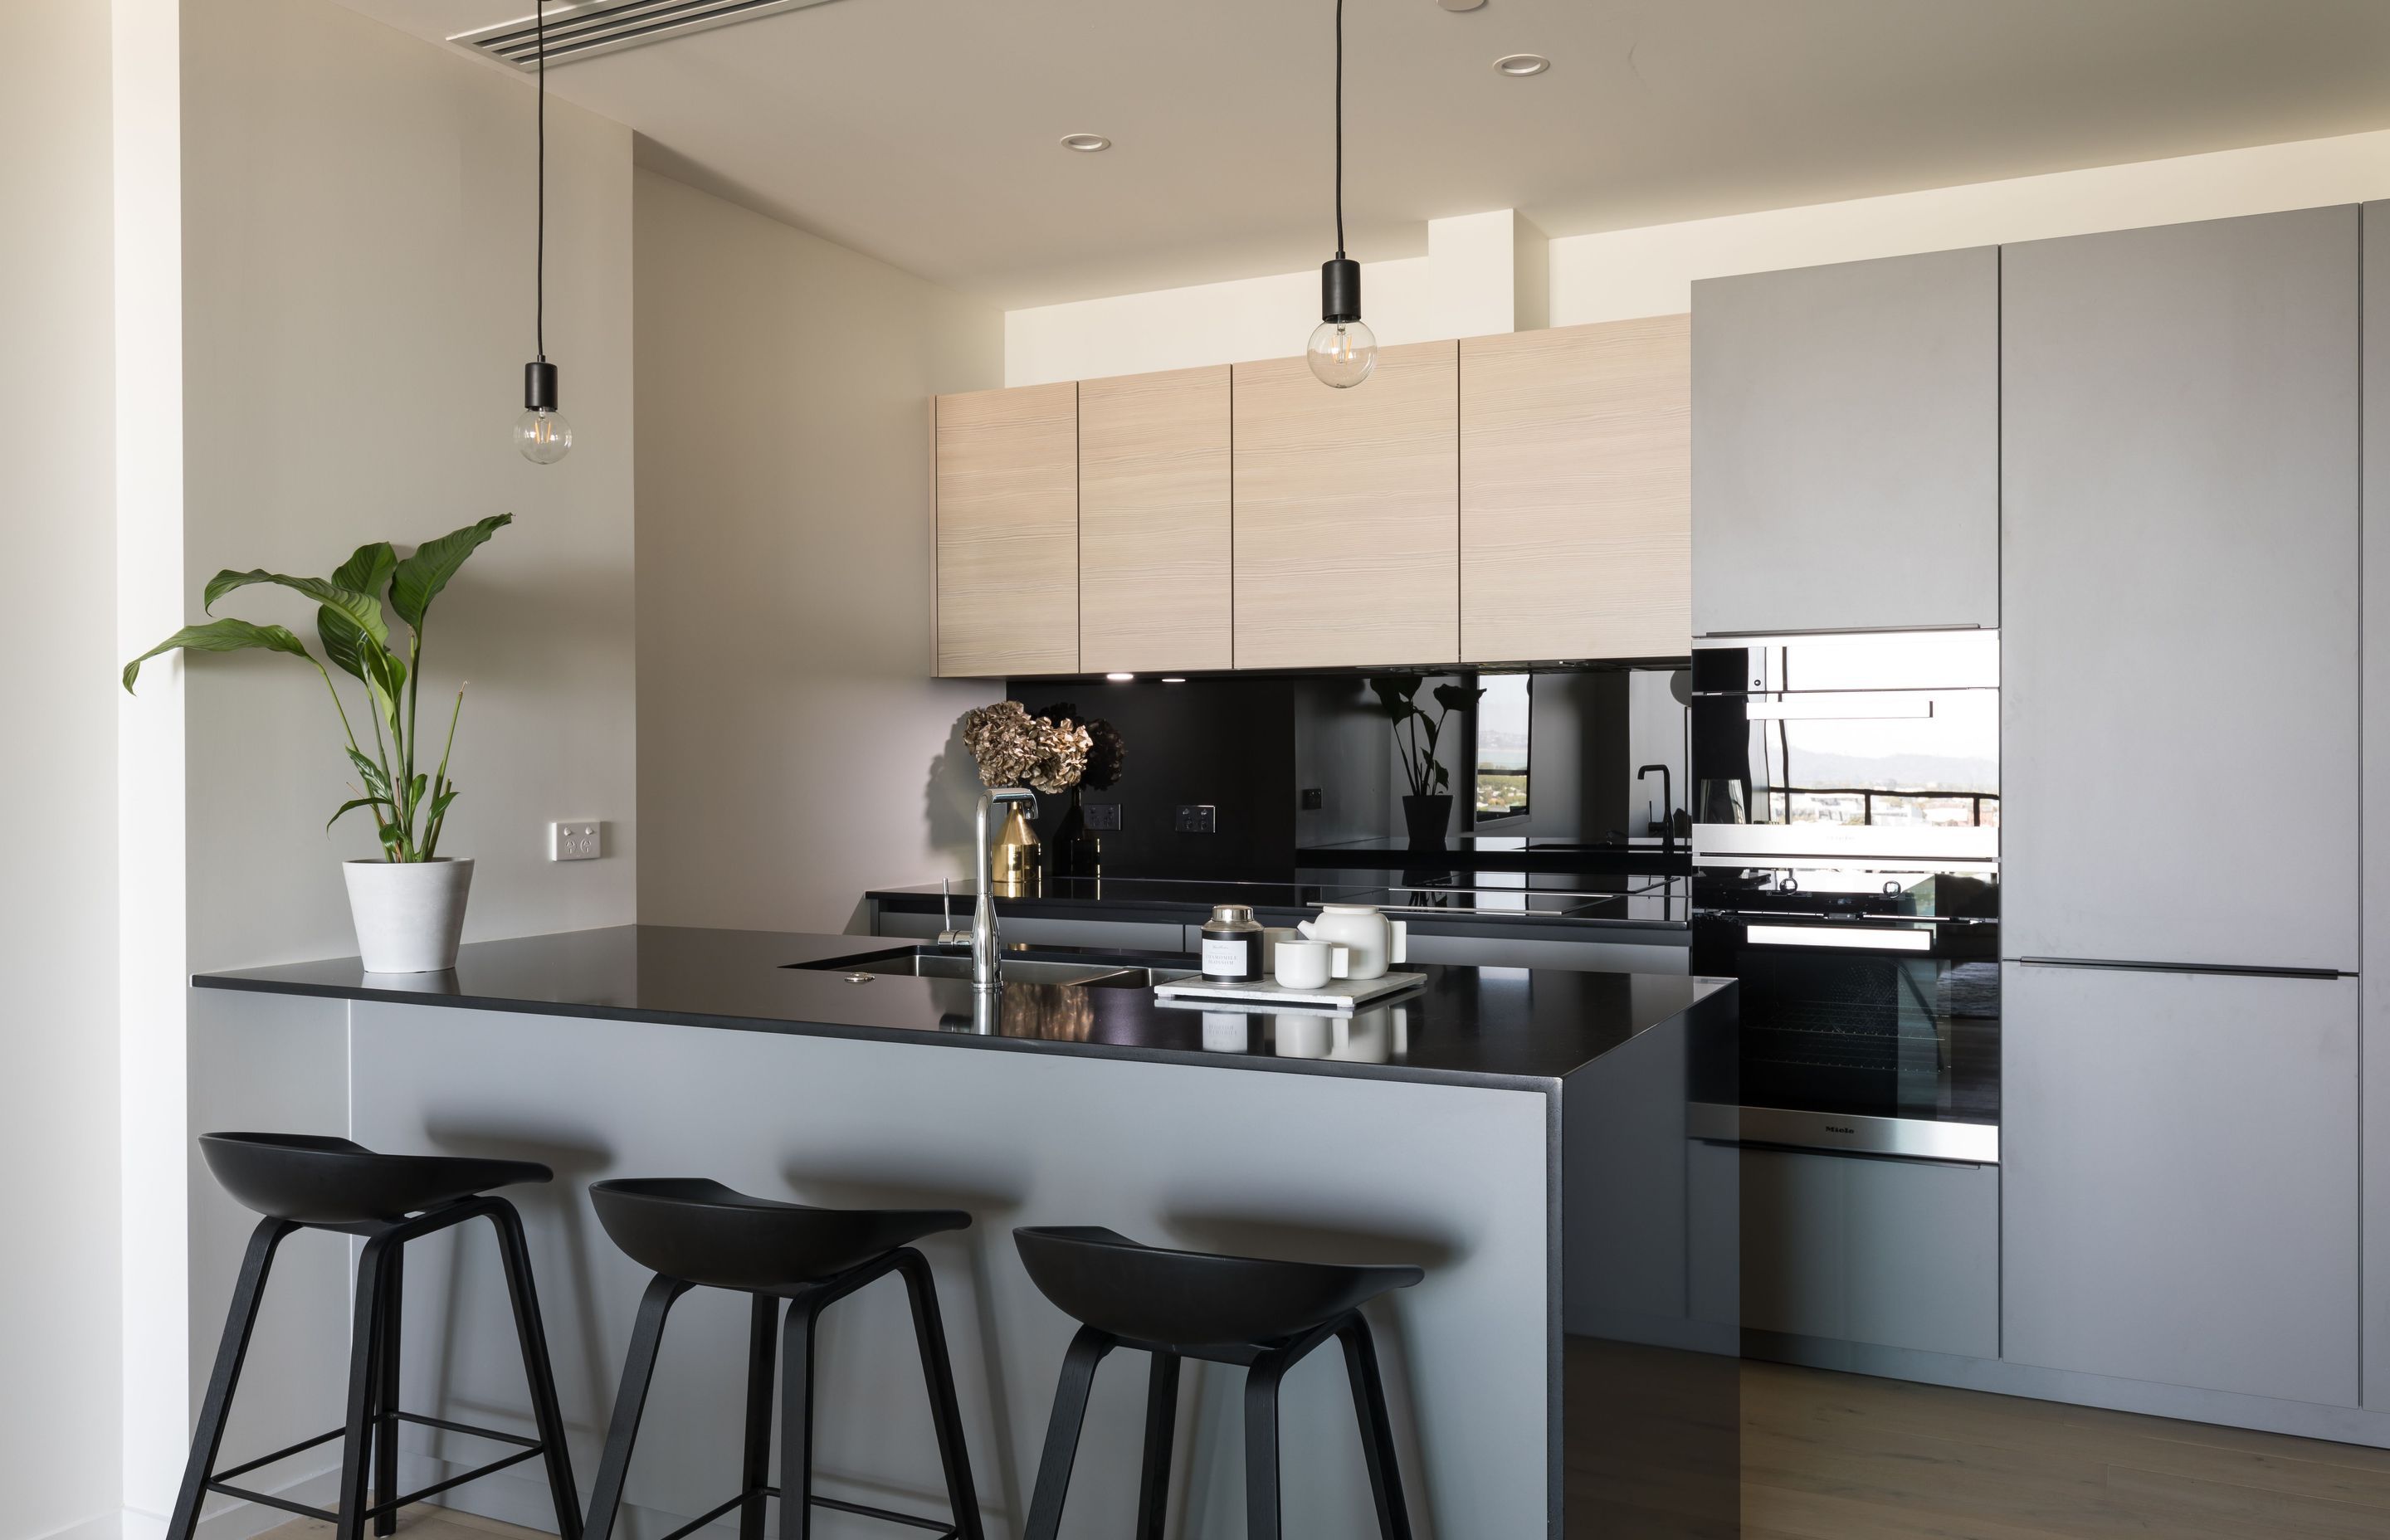 The secret to a great apartment kitchen is use warm, inviting tones that complement the overall palette and integrate the space into the overall scheme.